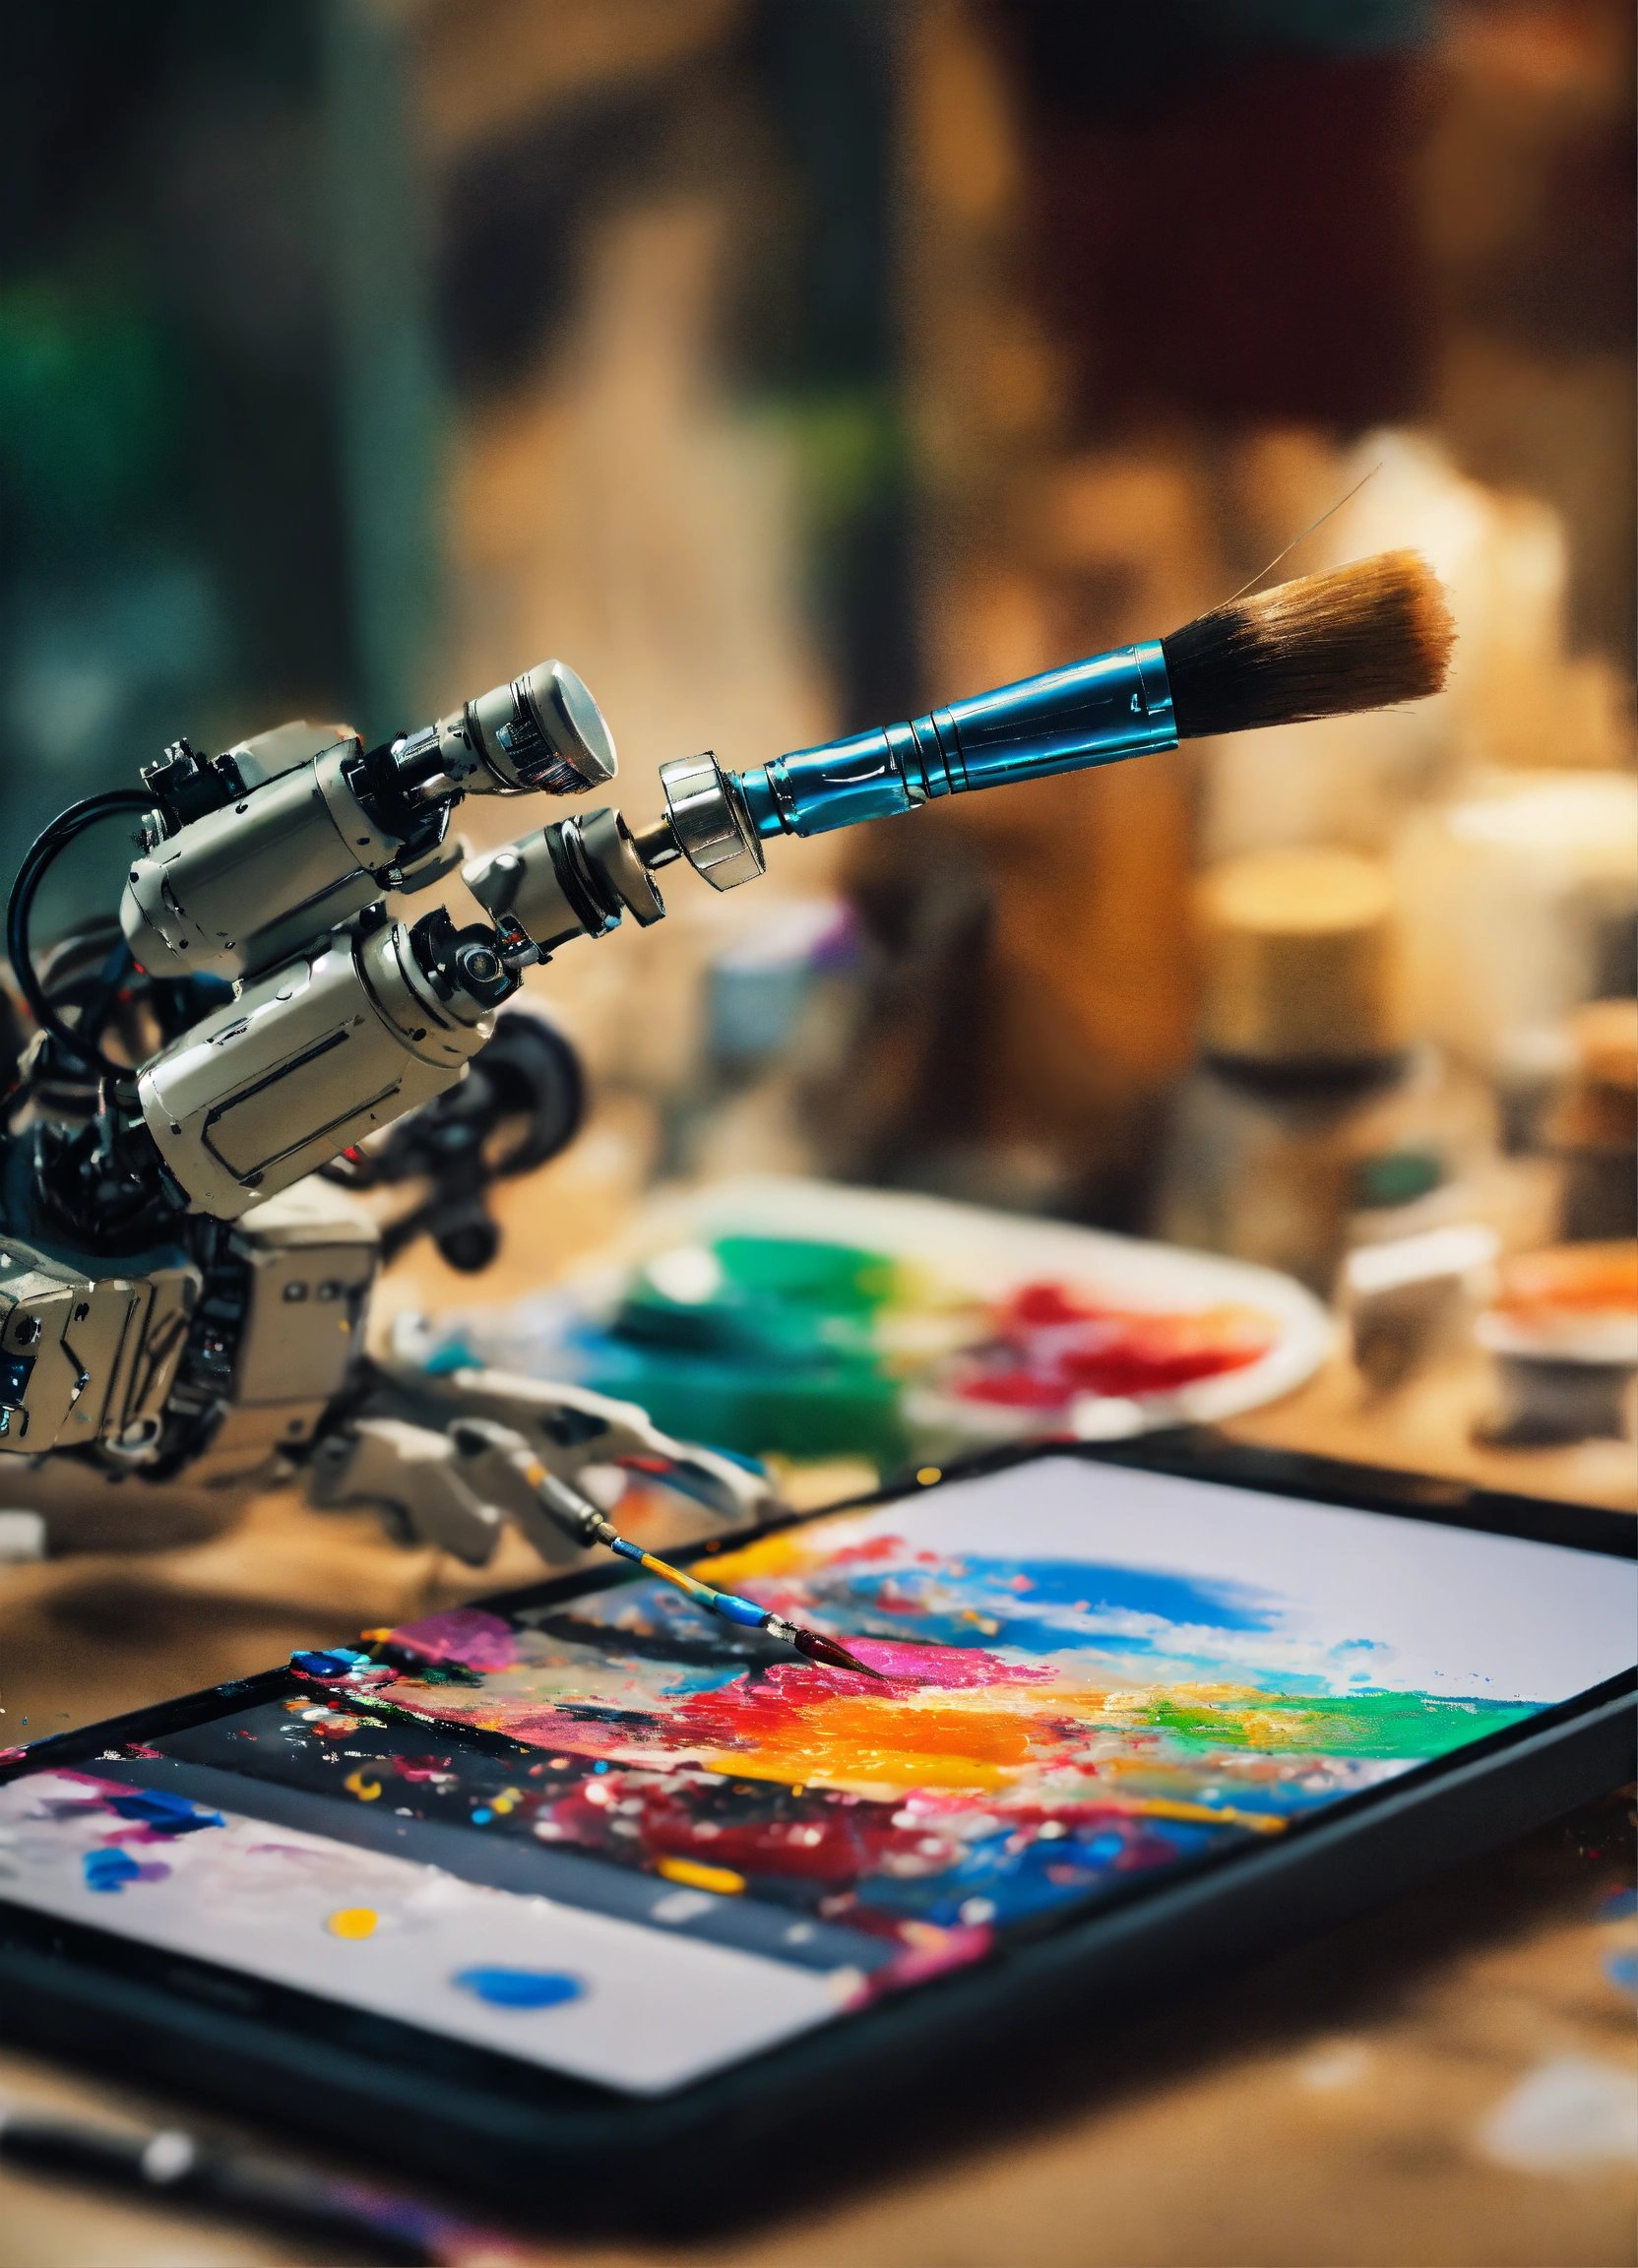 a robotic arm equipped with a paintbrush, actively engaged in creating a colorful artwork on a digital tablet. The setting appears to be an artist’s workspace, with various art supplies scattered around. The robot arm has multiple joints and segments, and it is holding a blue paintbrush with brown bristles, which is dipped in paint. The digital tablet displays vibrant and colorful strokes of paint, indicating that the robot is painting on it. Various art supplies including palettes filled with different colors of paint are visible in the background. The background also shows wooden surfaces and structures, giving an impression of a workshop or studio setting. The lighting is soft yet illuminating enough to highlight the details of the robot and its ongoing artwork.